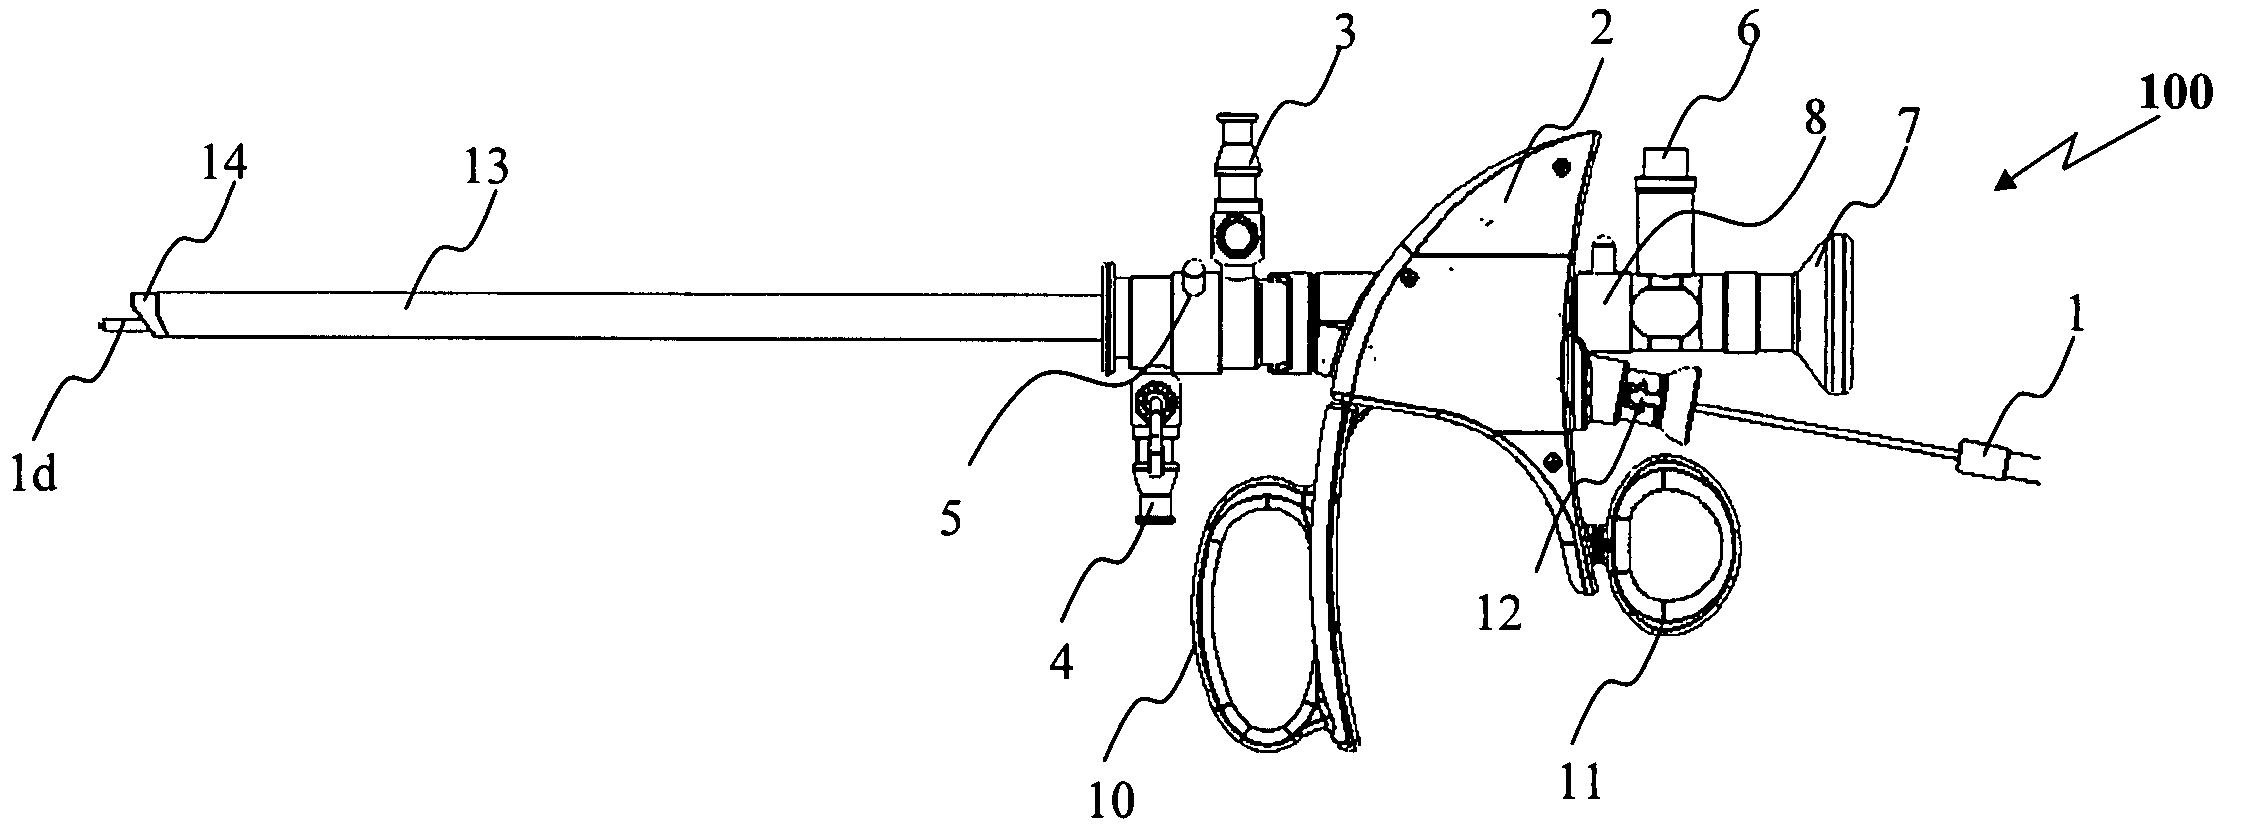 Working tool for laser-facilitated removal of tissue from a body cavity and methods thereof